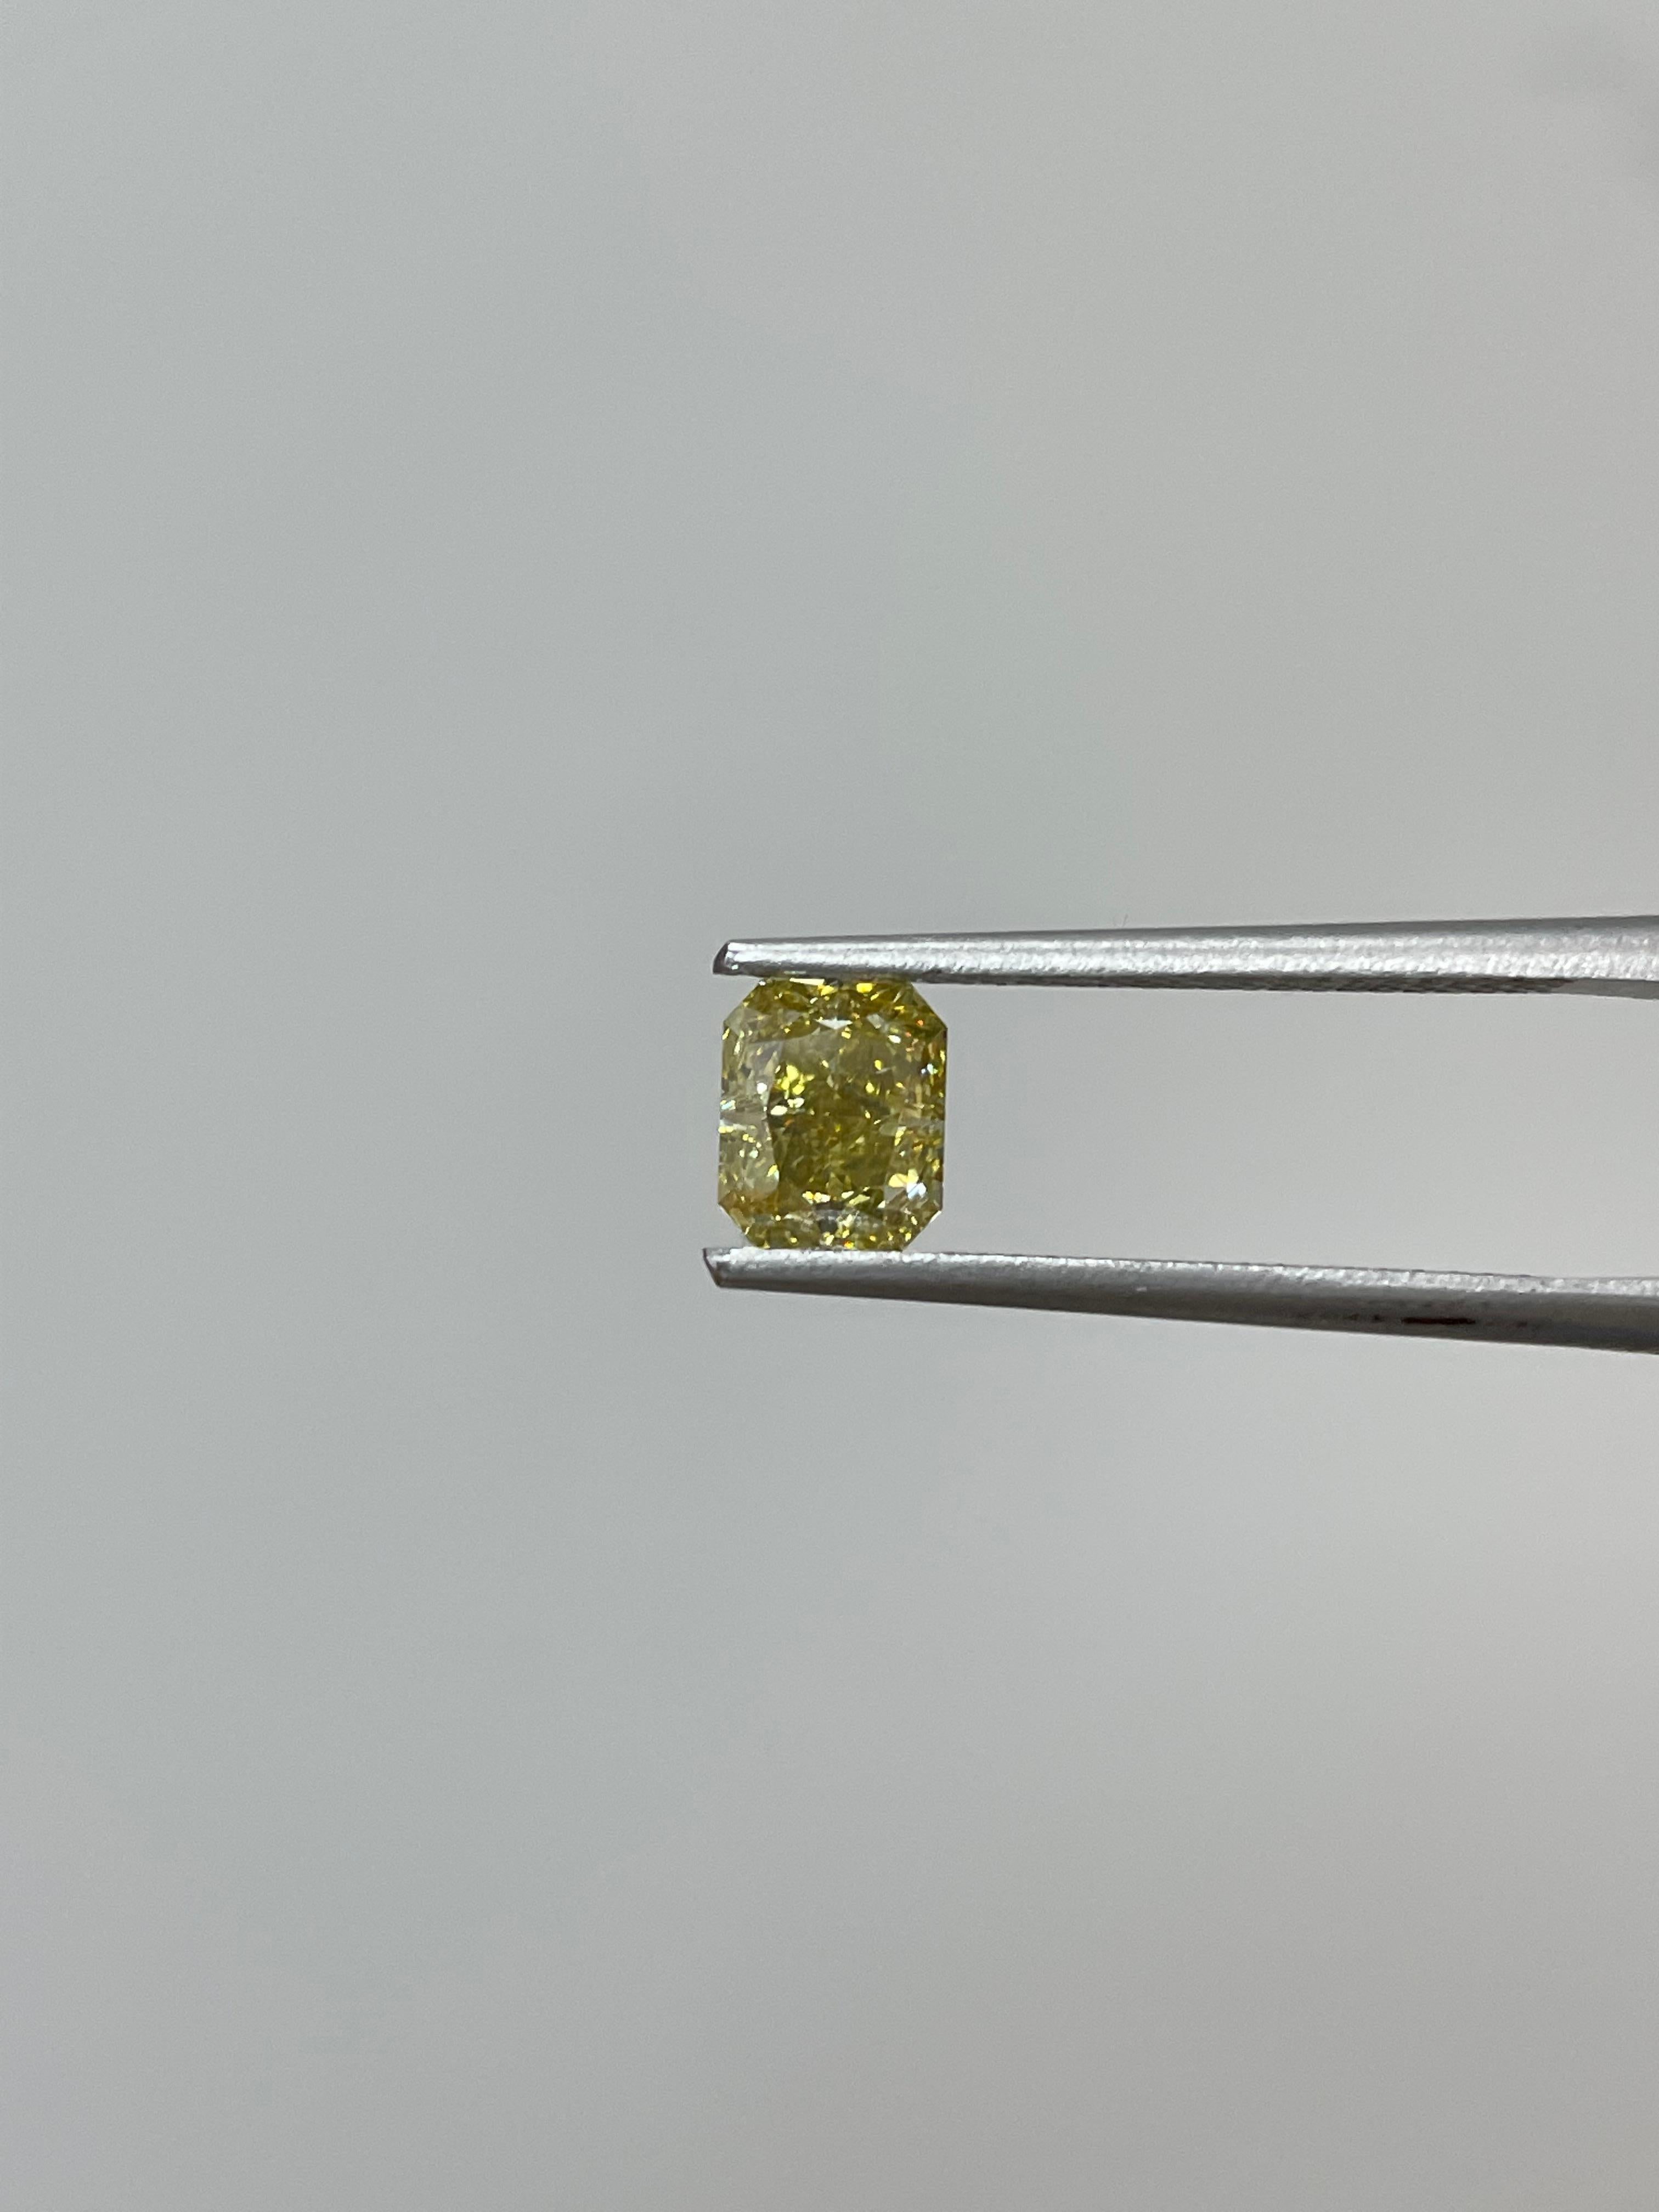 Brilliant Cut 1.10 Carat Rectangular Brilliant GIA Certified Fancy Brownish Yellow Vs2 Clarity For Sale